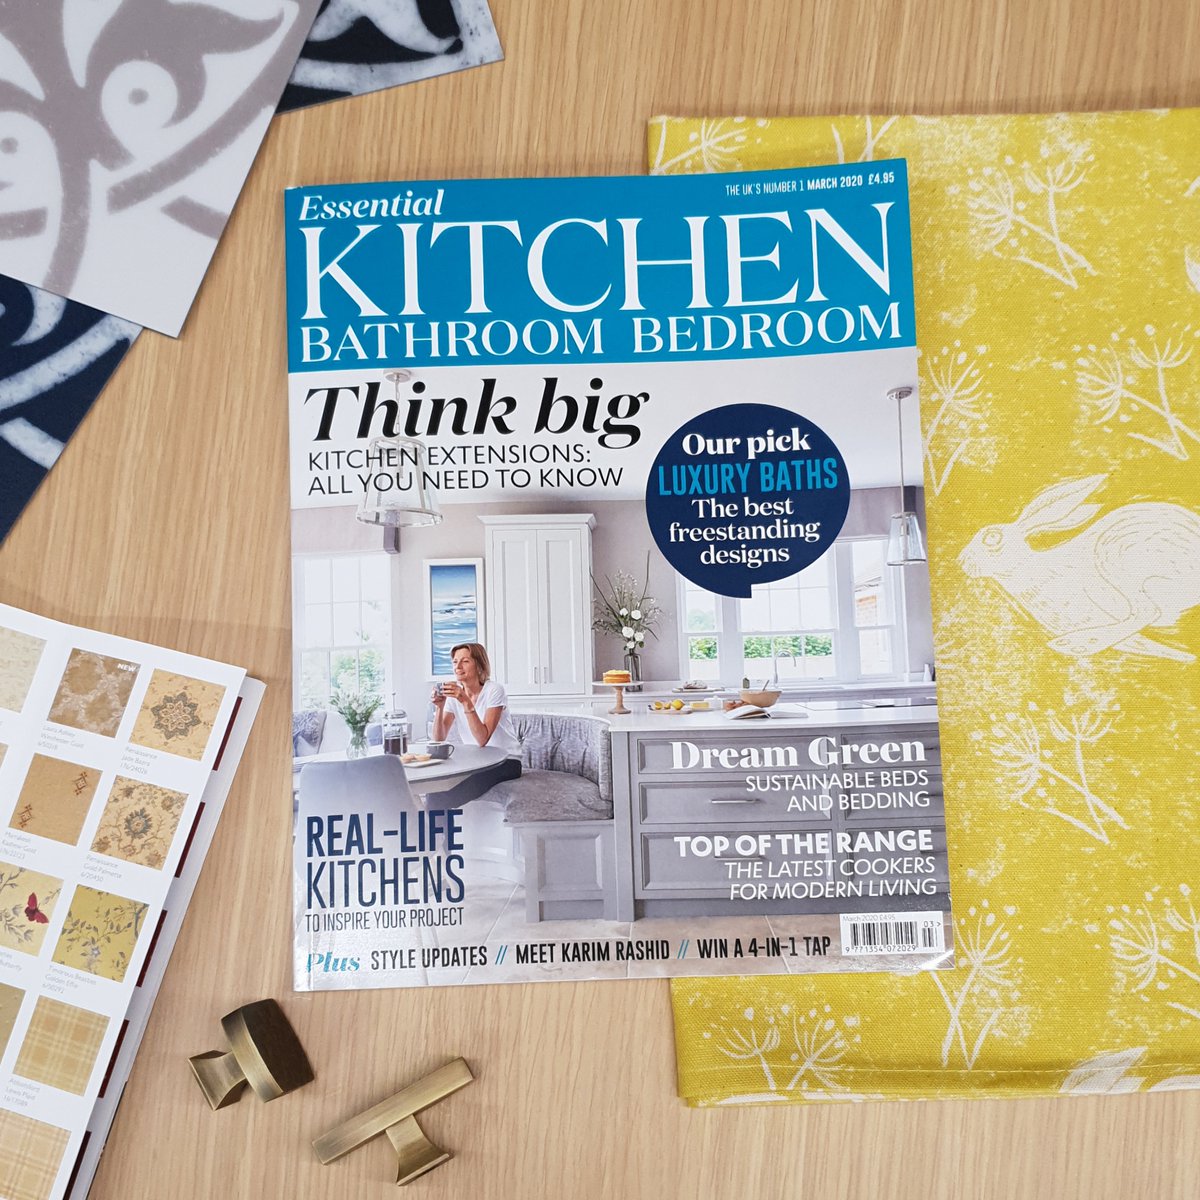 The March issue of @EKBBMAG is out now! This month we uncover all your need to know about kitchen extensions, the latest in sustainable bedroom design, and our favourite freestanding baths for a relaxing soak 🛁 #EKBBHOME